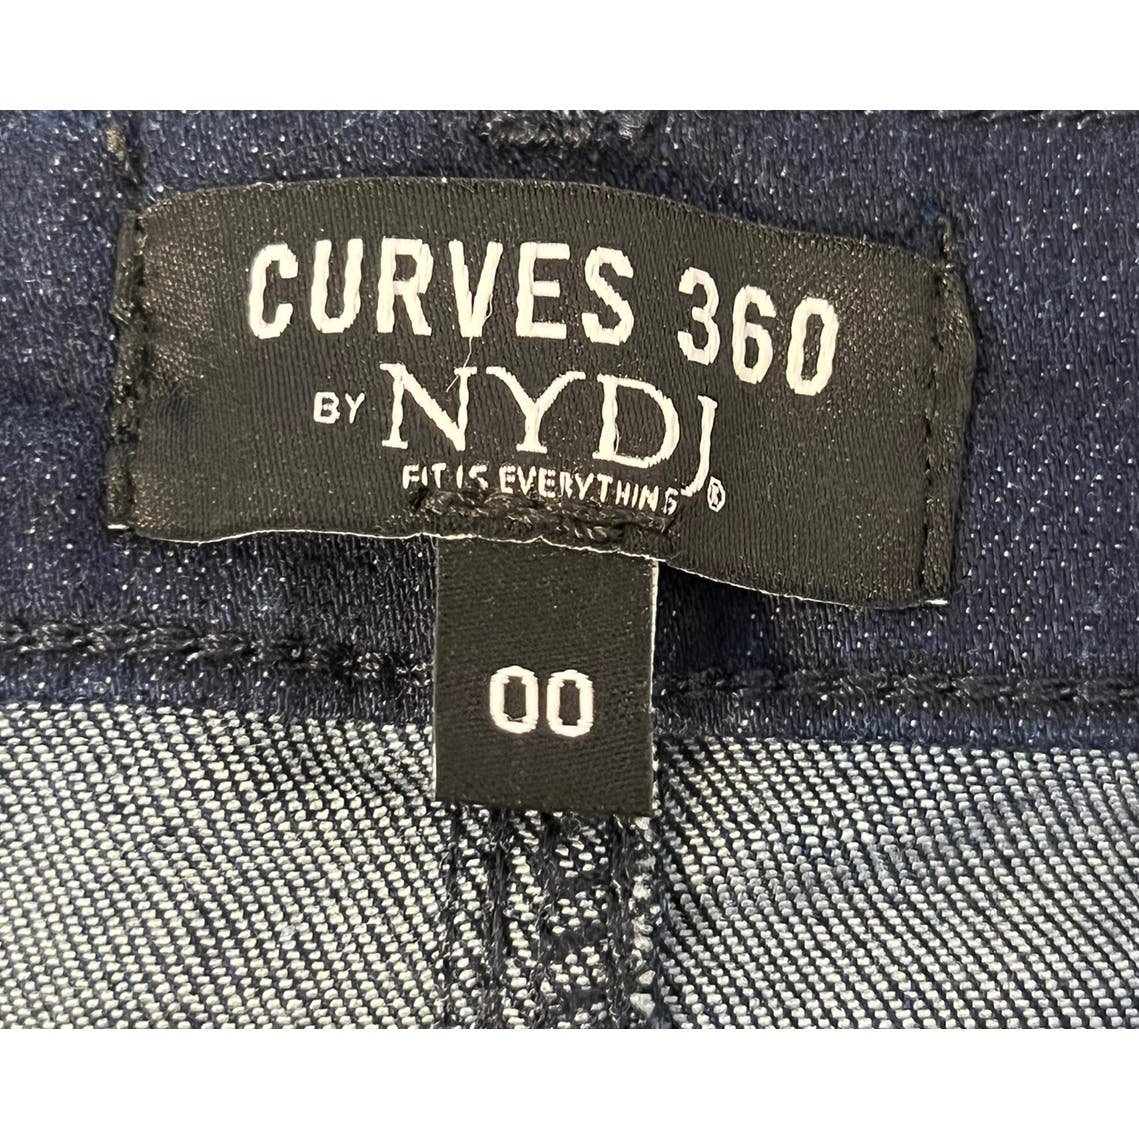 Curves 360 by NYDJ Womens size 00 jeans dark blue slim ankle straight NEW dqMbrNP0Y